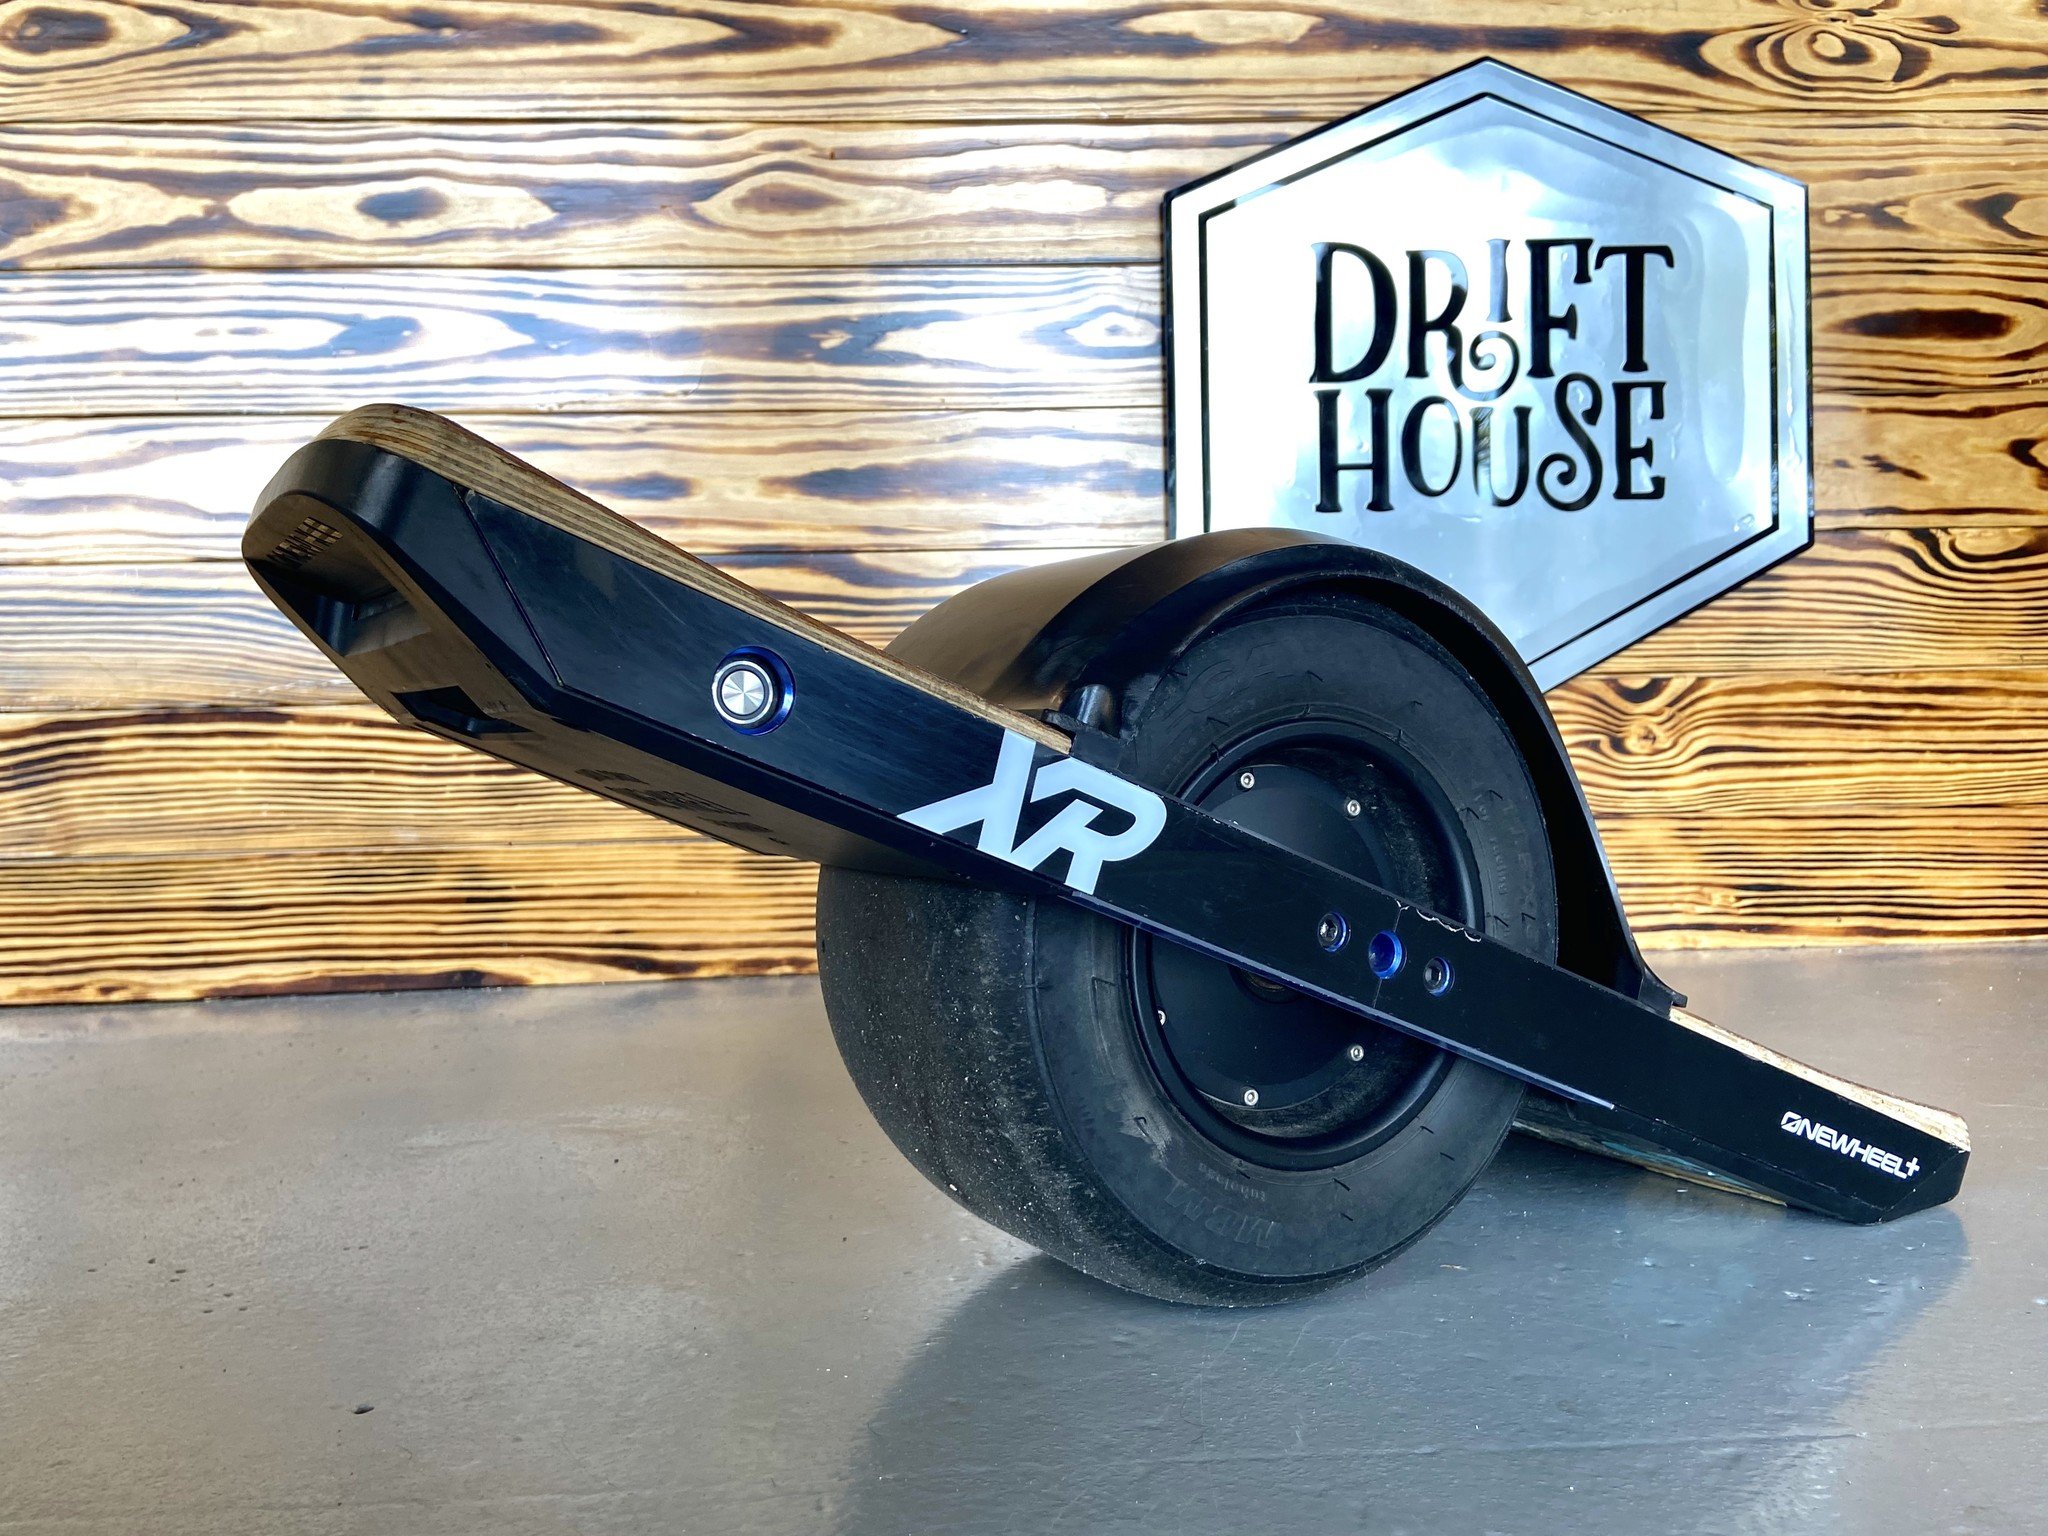 Telemacos højt lette Thoughts On Onewheel XR + Onewheel Pint – Drift House